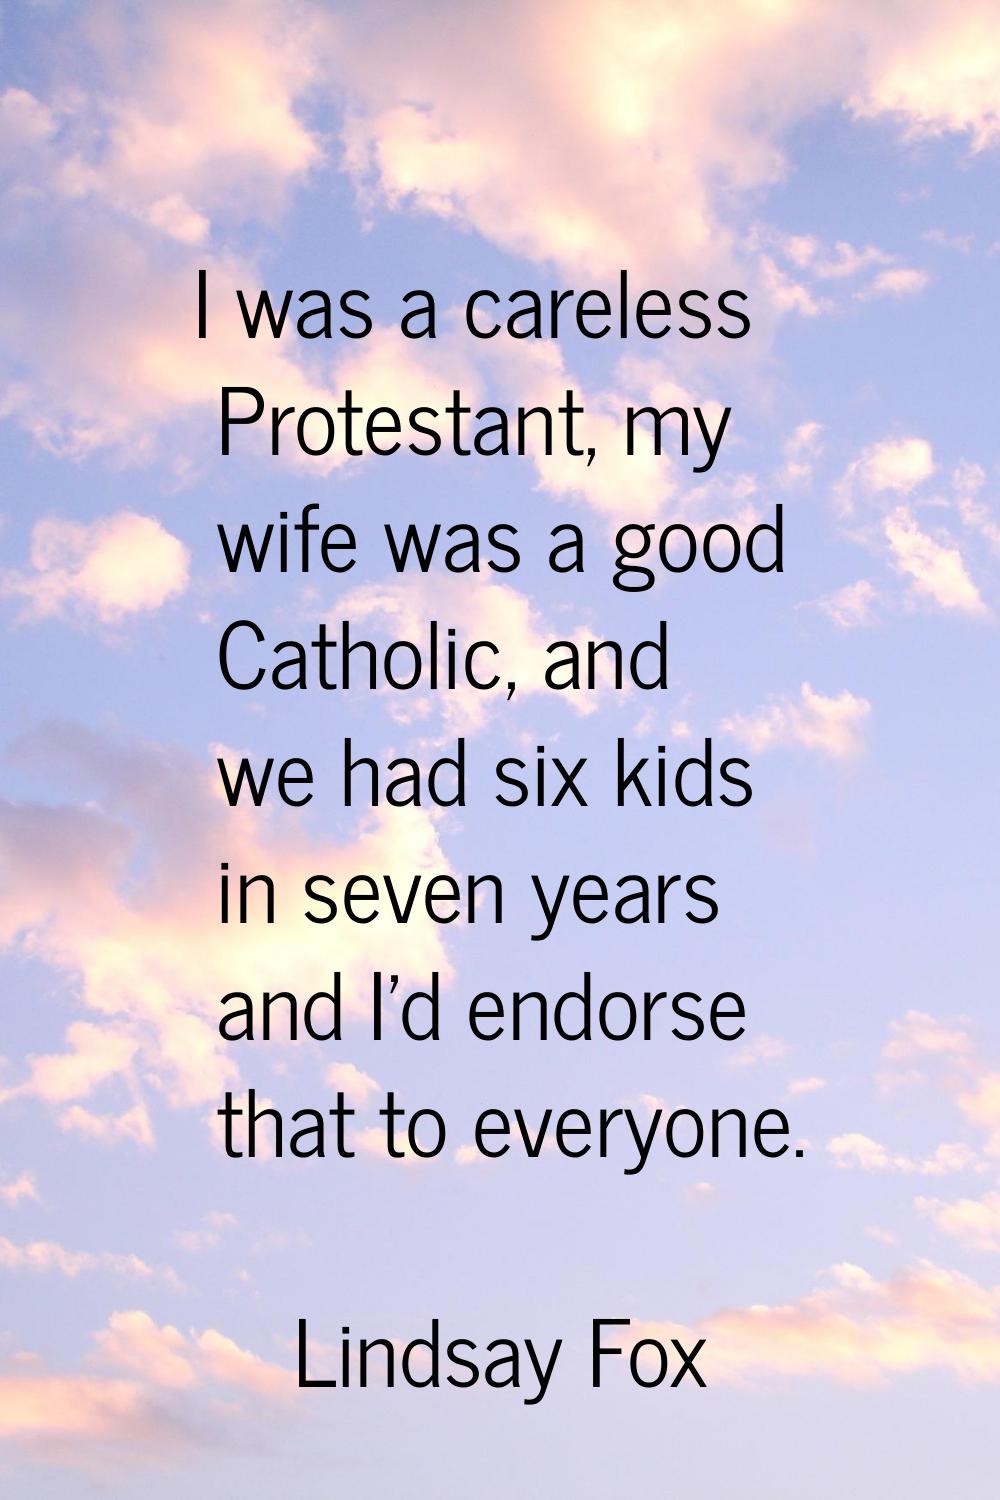 I was a careless Protestant, my wife was a good Catholic, and we had six kids in seven years and I'